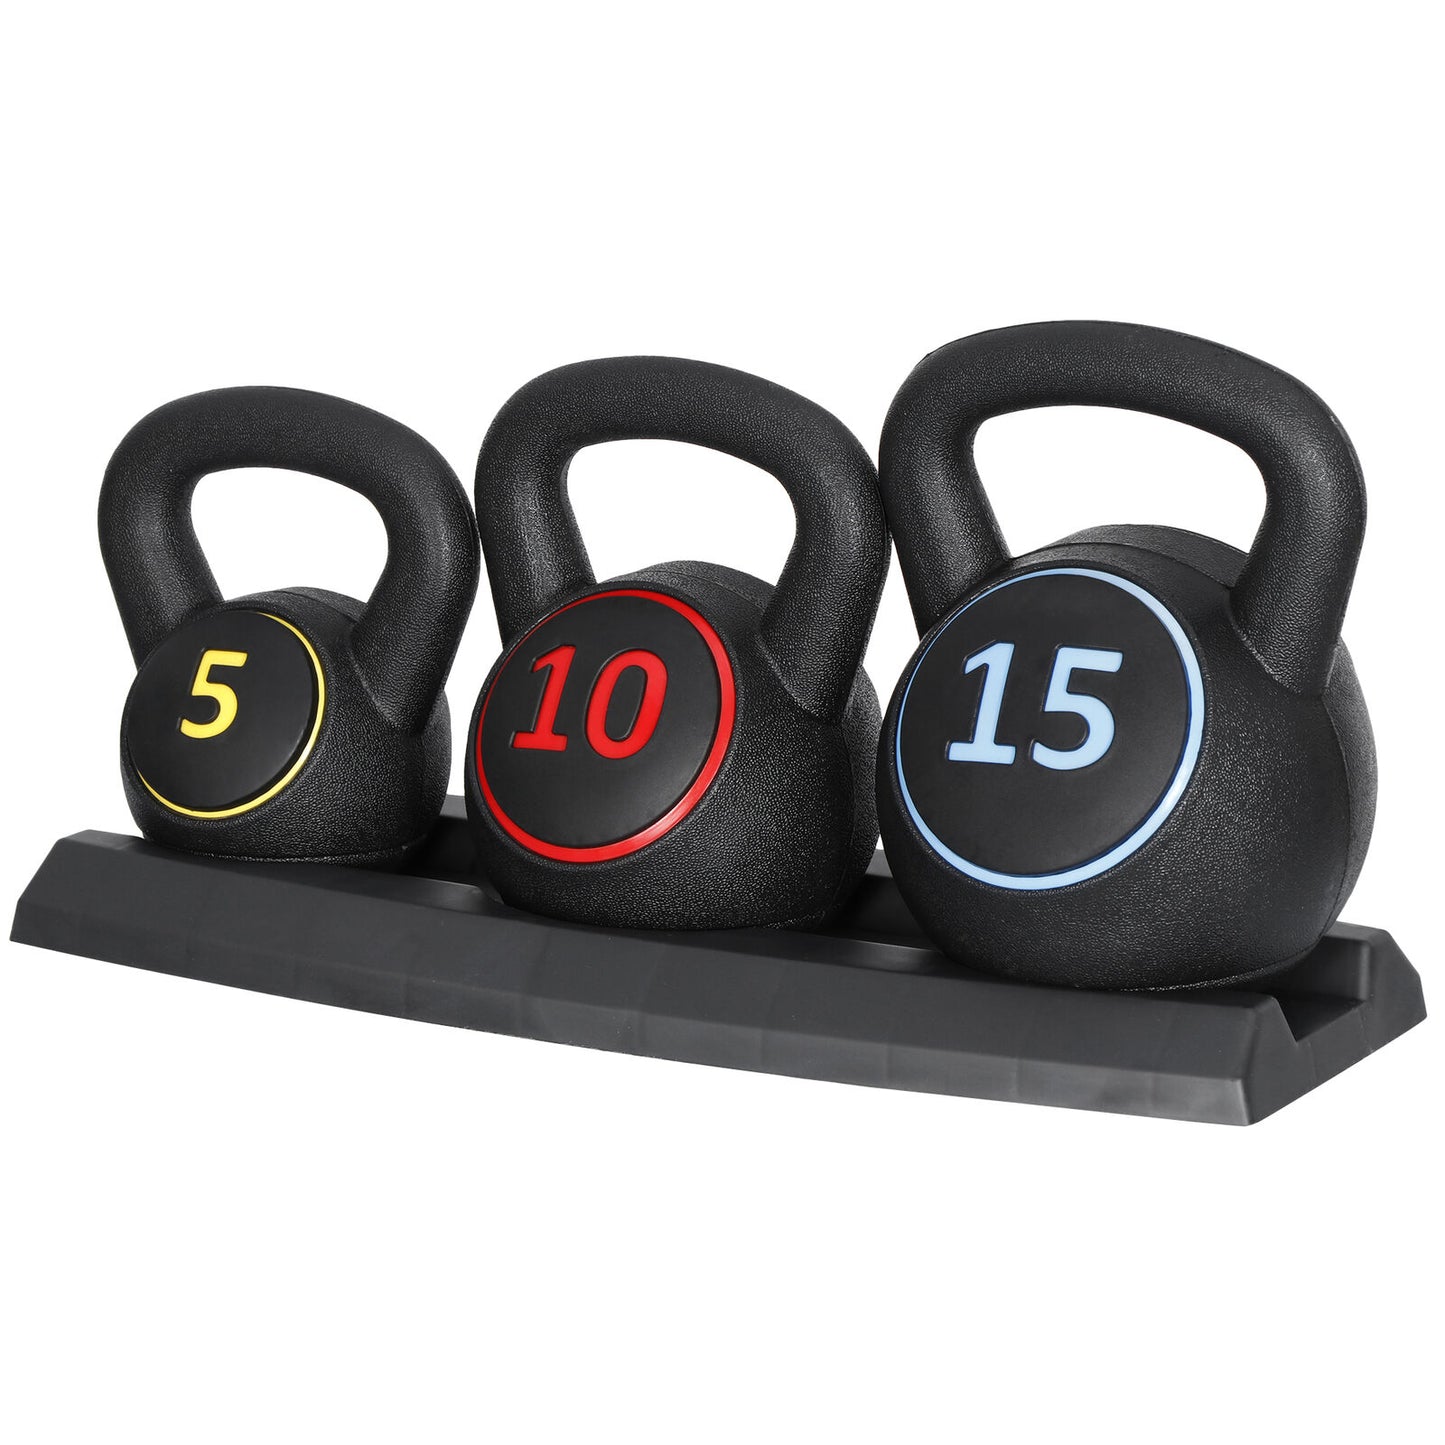 Pro 3-Piece Kettlebell Set Fitness Strength Training Exercise With Base Rack